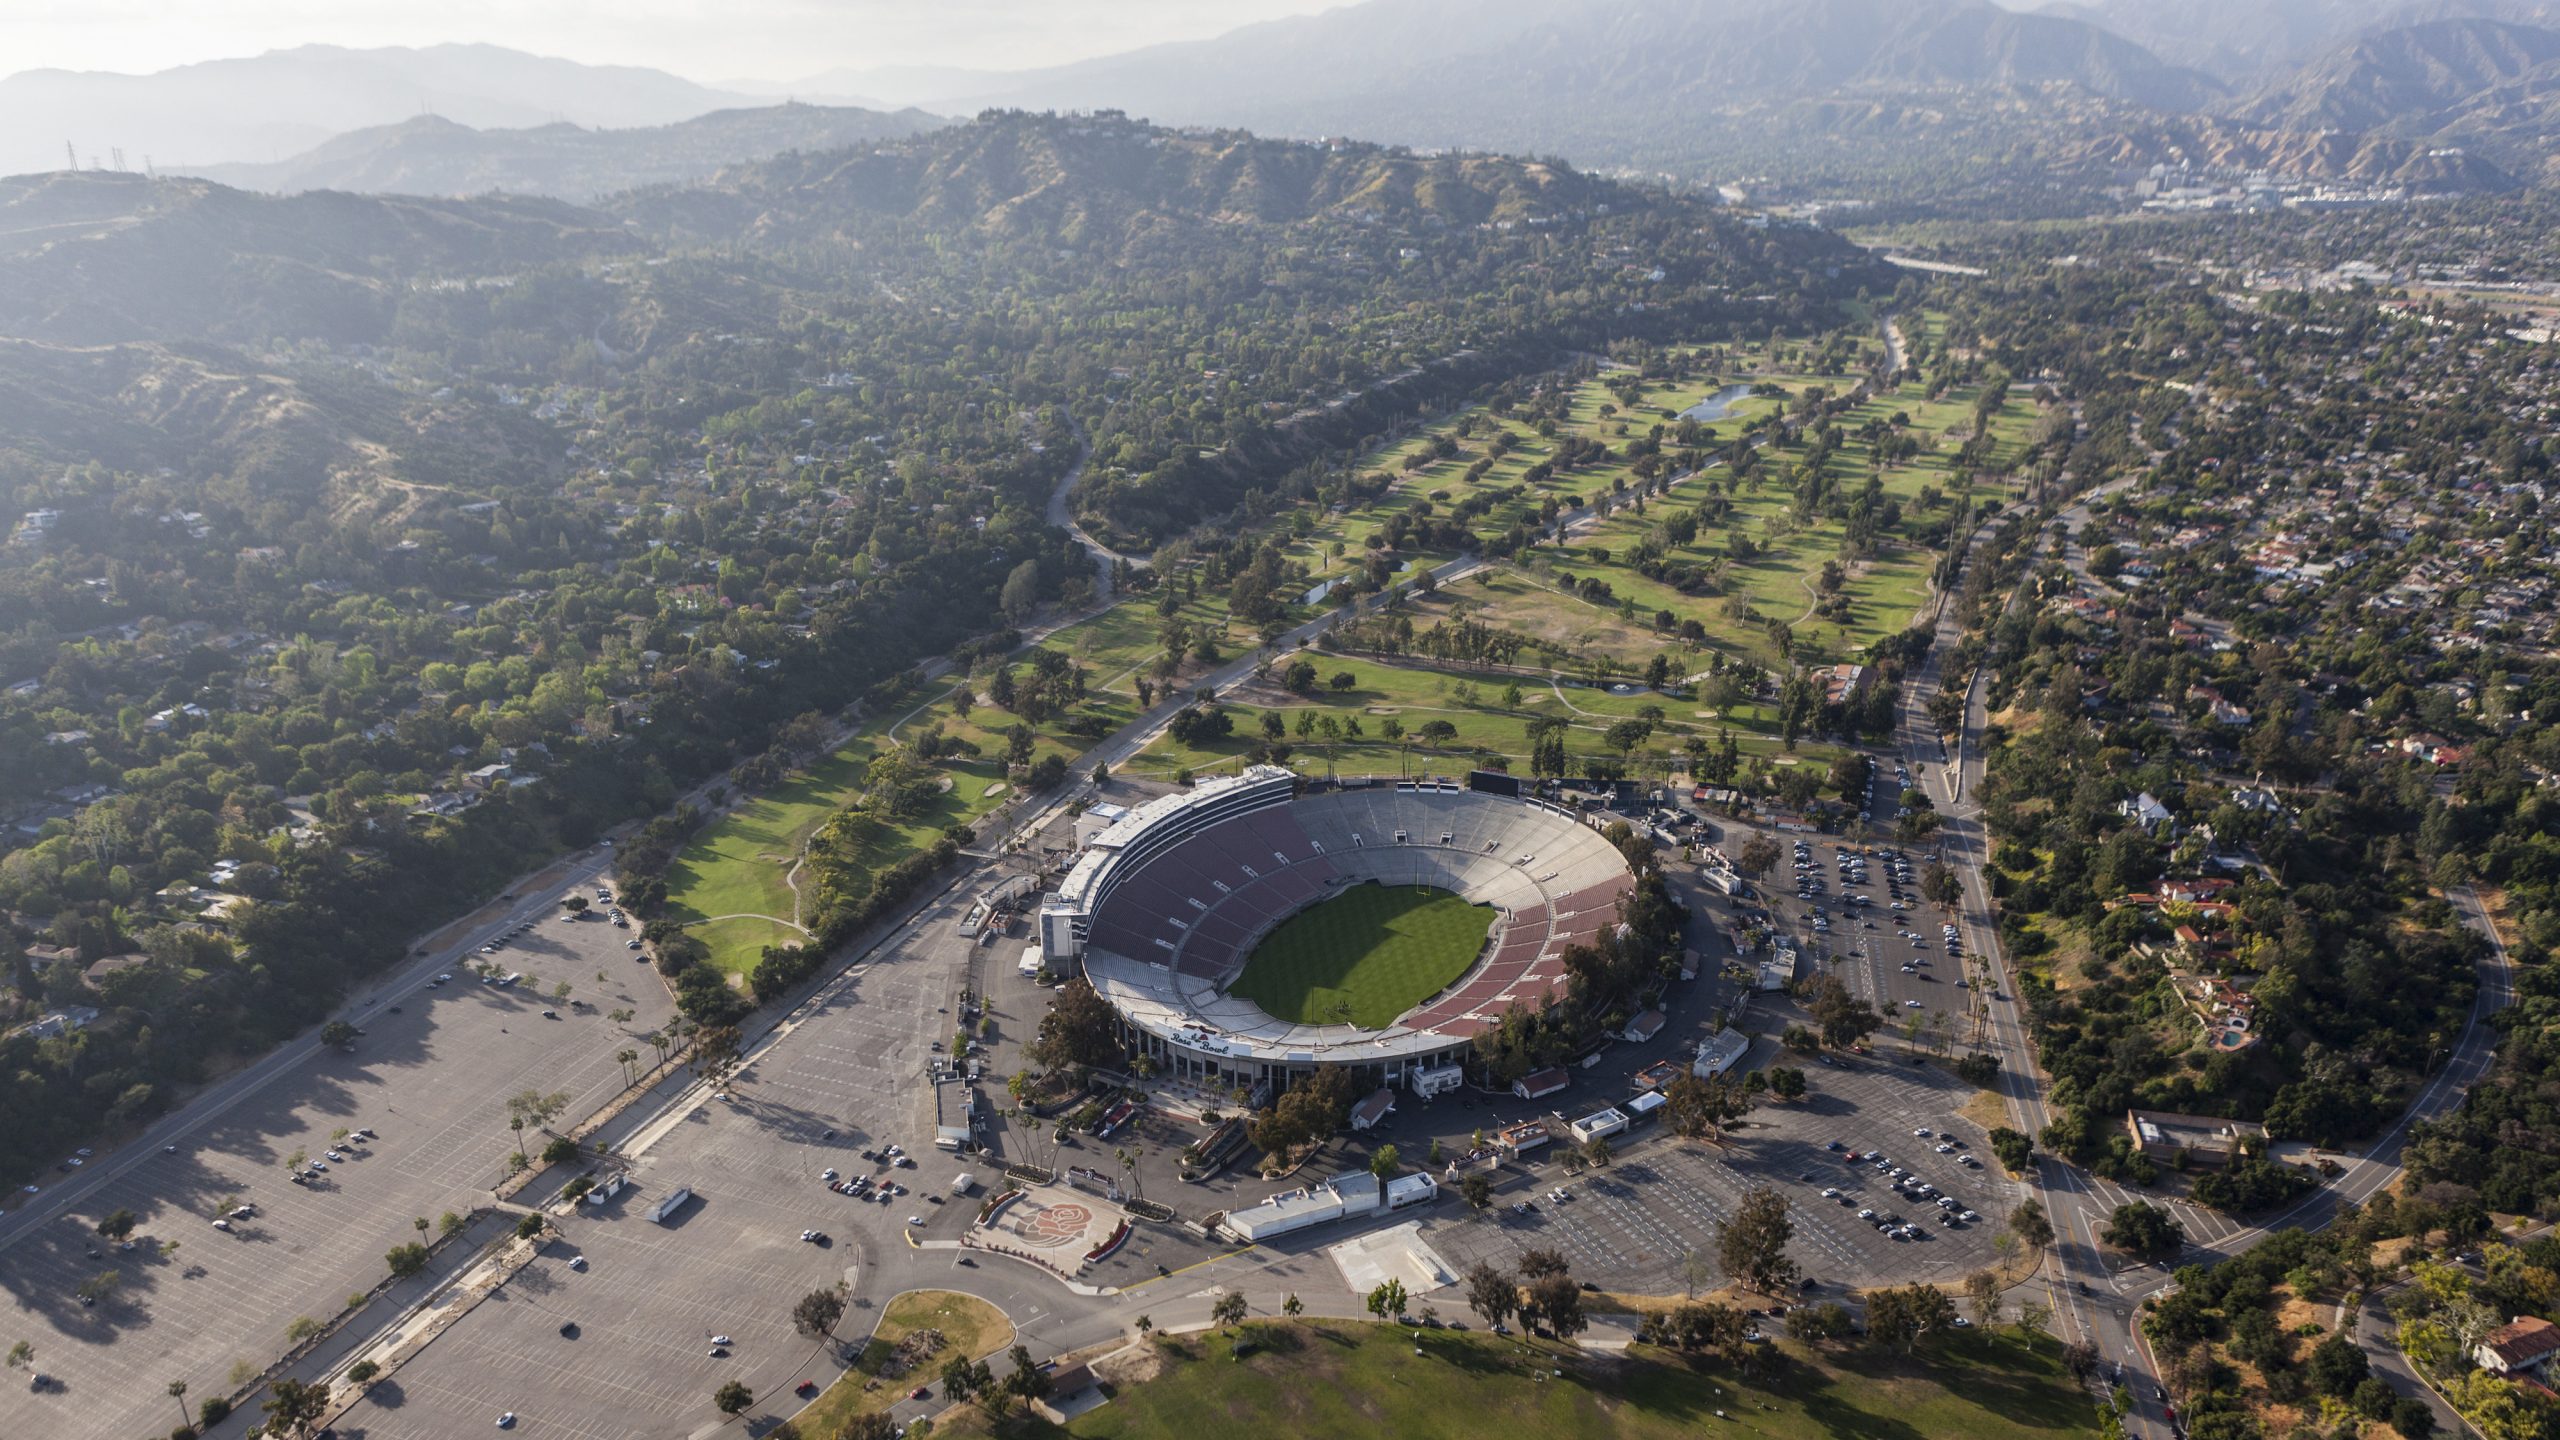 Overview of the historic Rose Bowl Stadium, along with surrounding parking and mountains